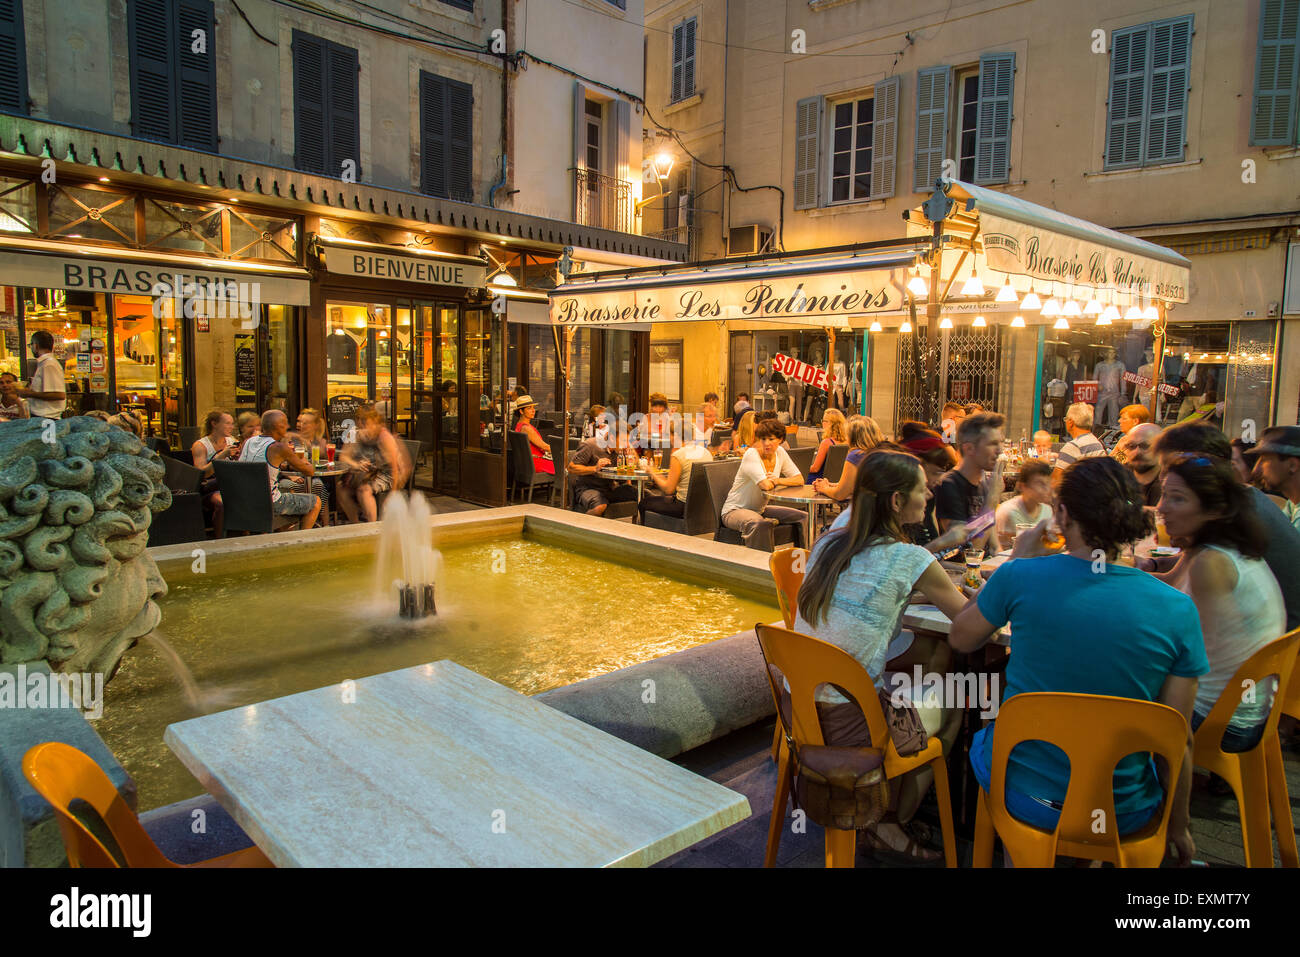 Night view of a Brasserie cafe restaurant with people seated outside at tables, Carpentras, Provence, France Stock Photo